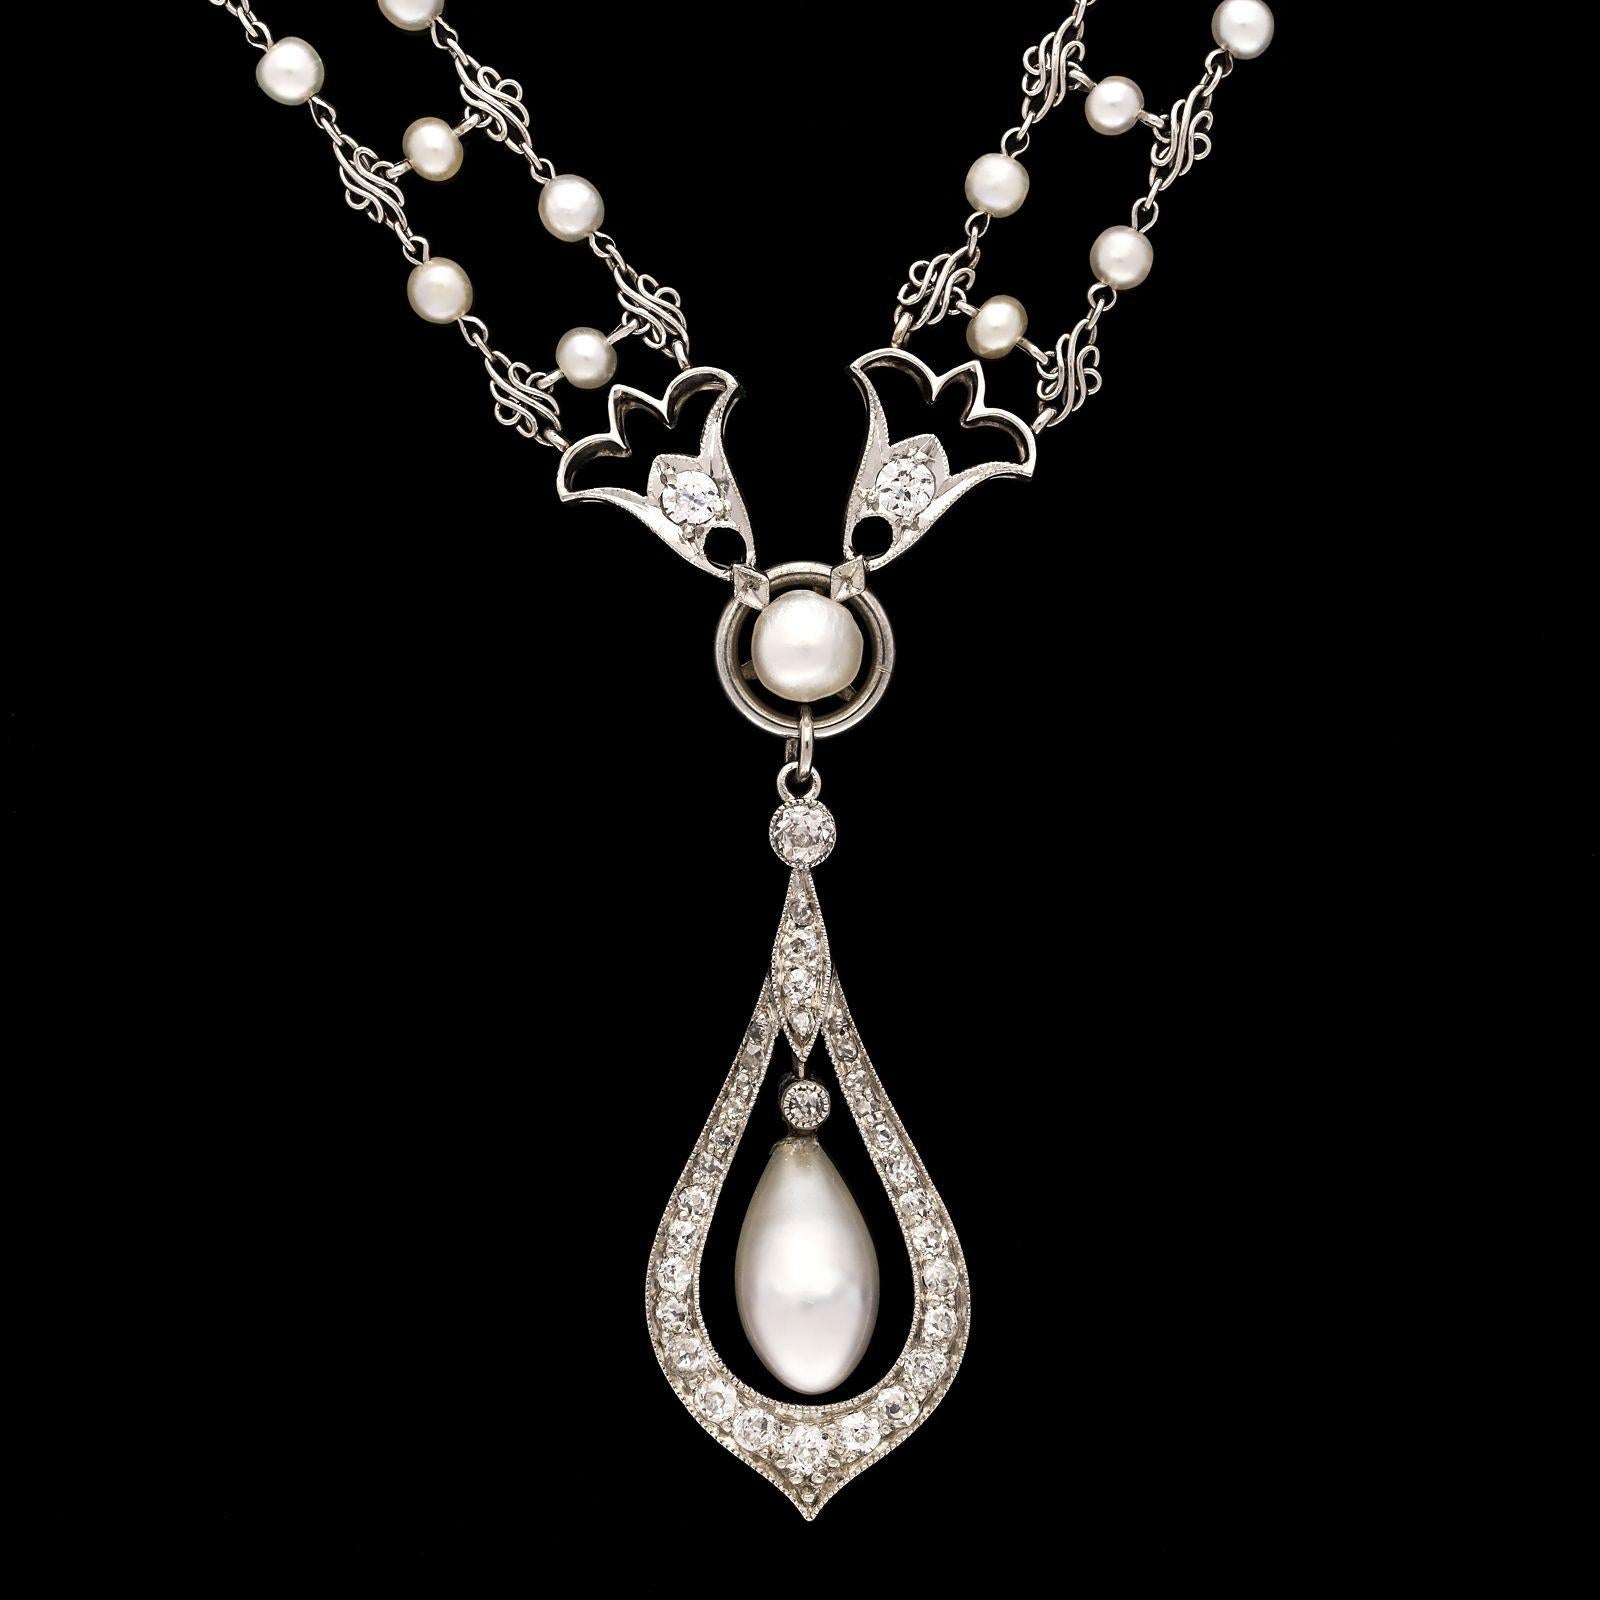 A beautiful antique Edwardian pearl and diamond sautoir necklace c.1910, the necklace formed of a double row of seed pearls interspersed with platinum triple scroll links and joined together by single seed pearls forming a loosely woven effect,